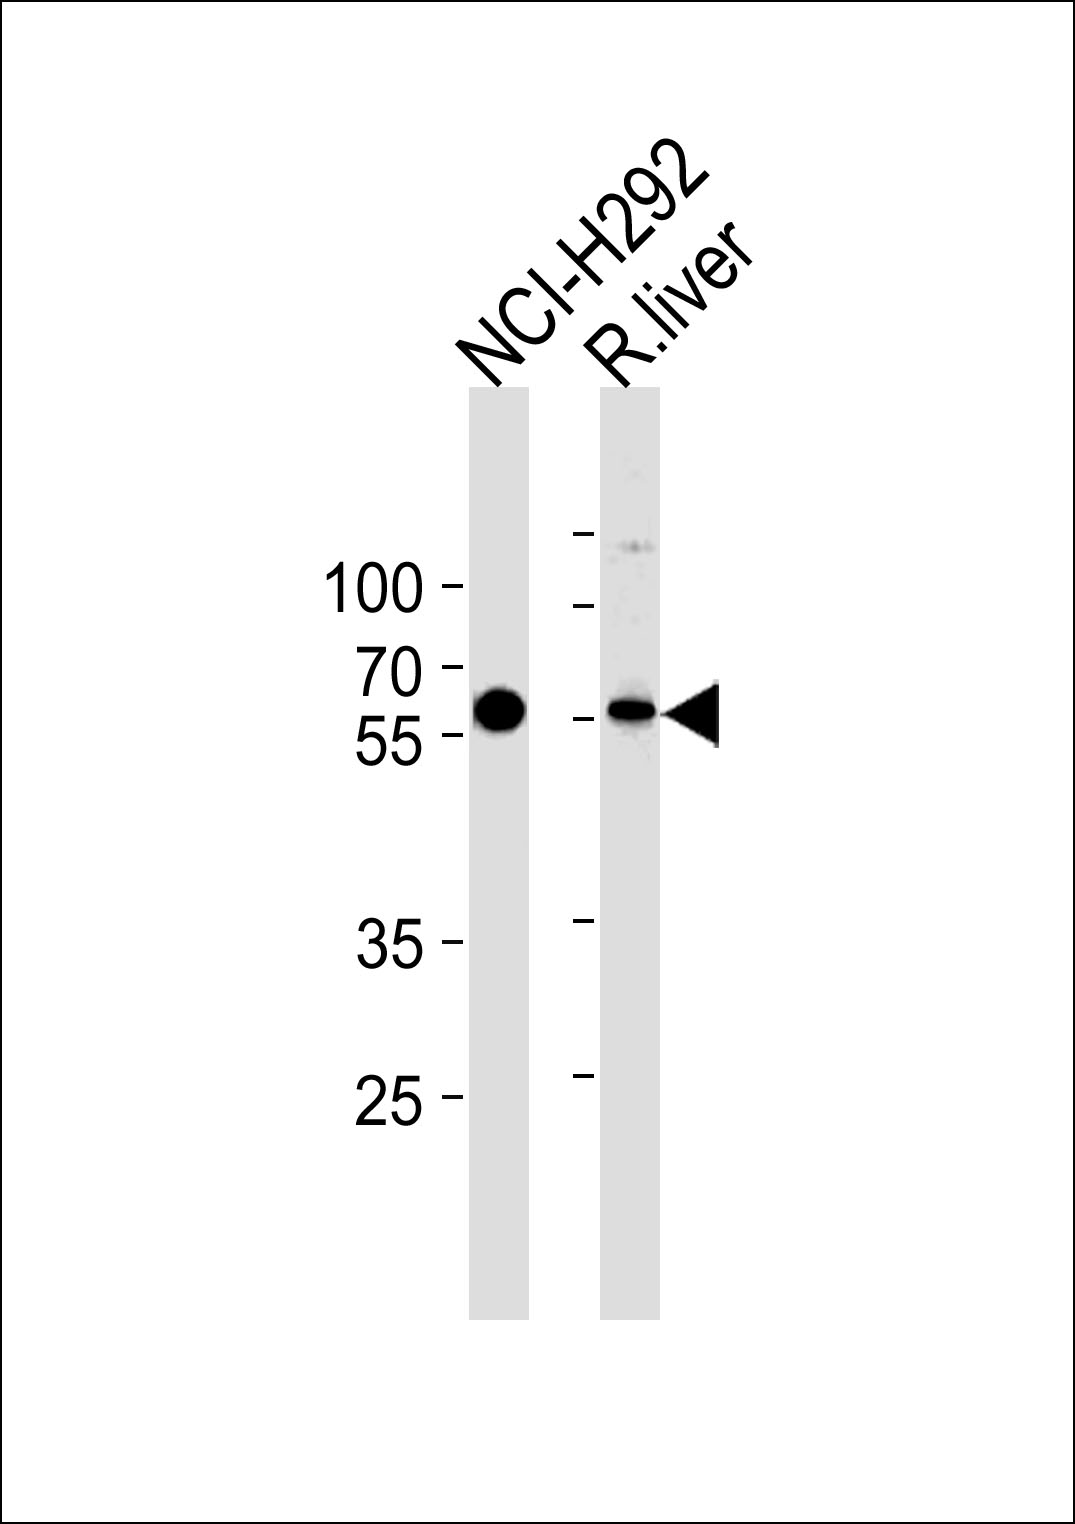 MCCC2 Antibody (Center) (Cat. #AP6924c) western blot analysis in NCI-H292 cell line and rat liver tissue lysates (35ug/lane).This demonstrates the MCCC2 antibody detected the MCCC2 protein (arrow).